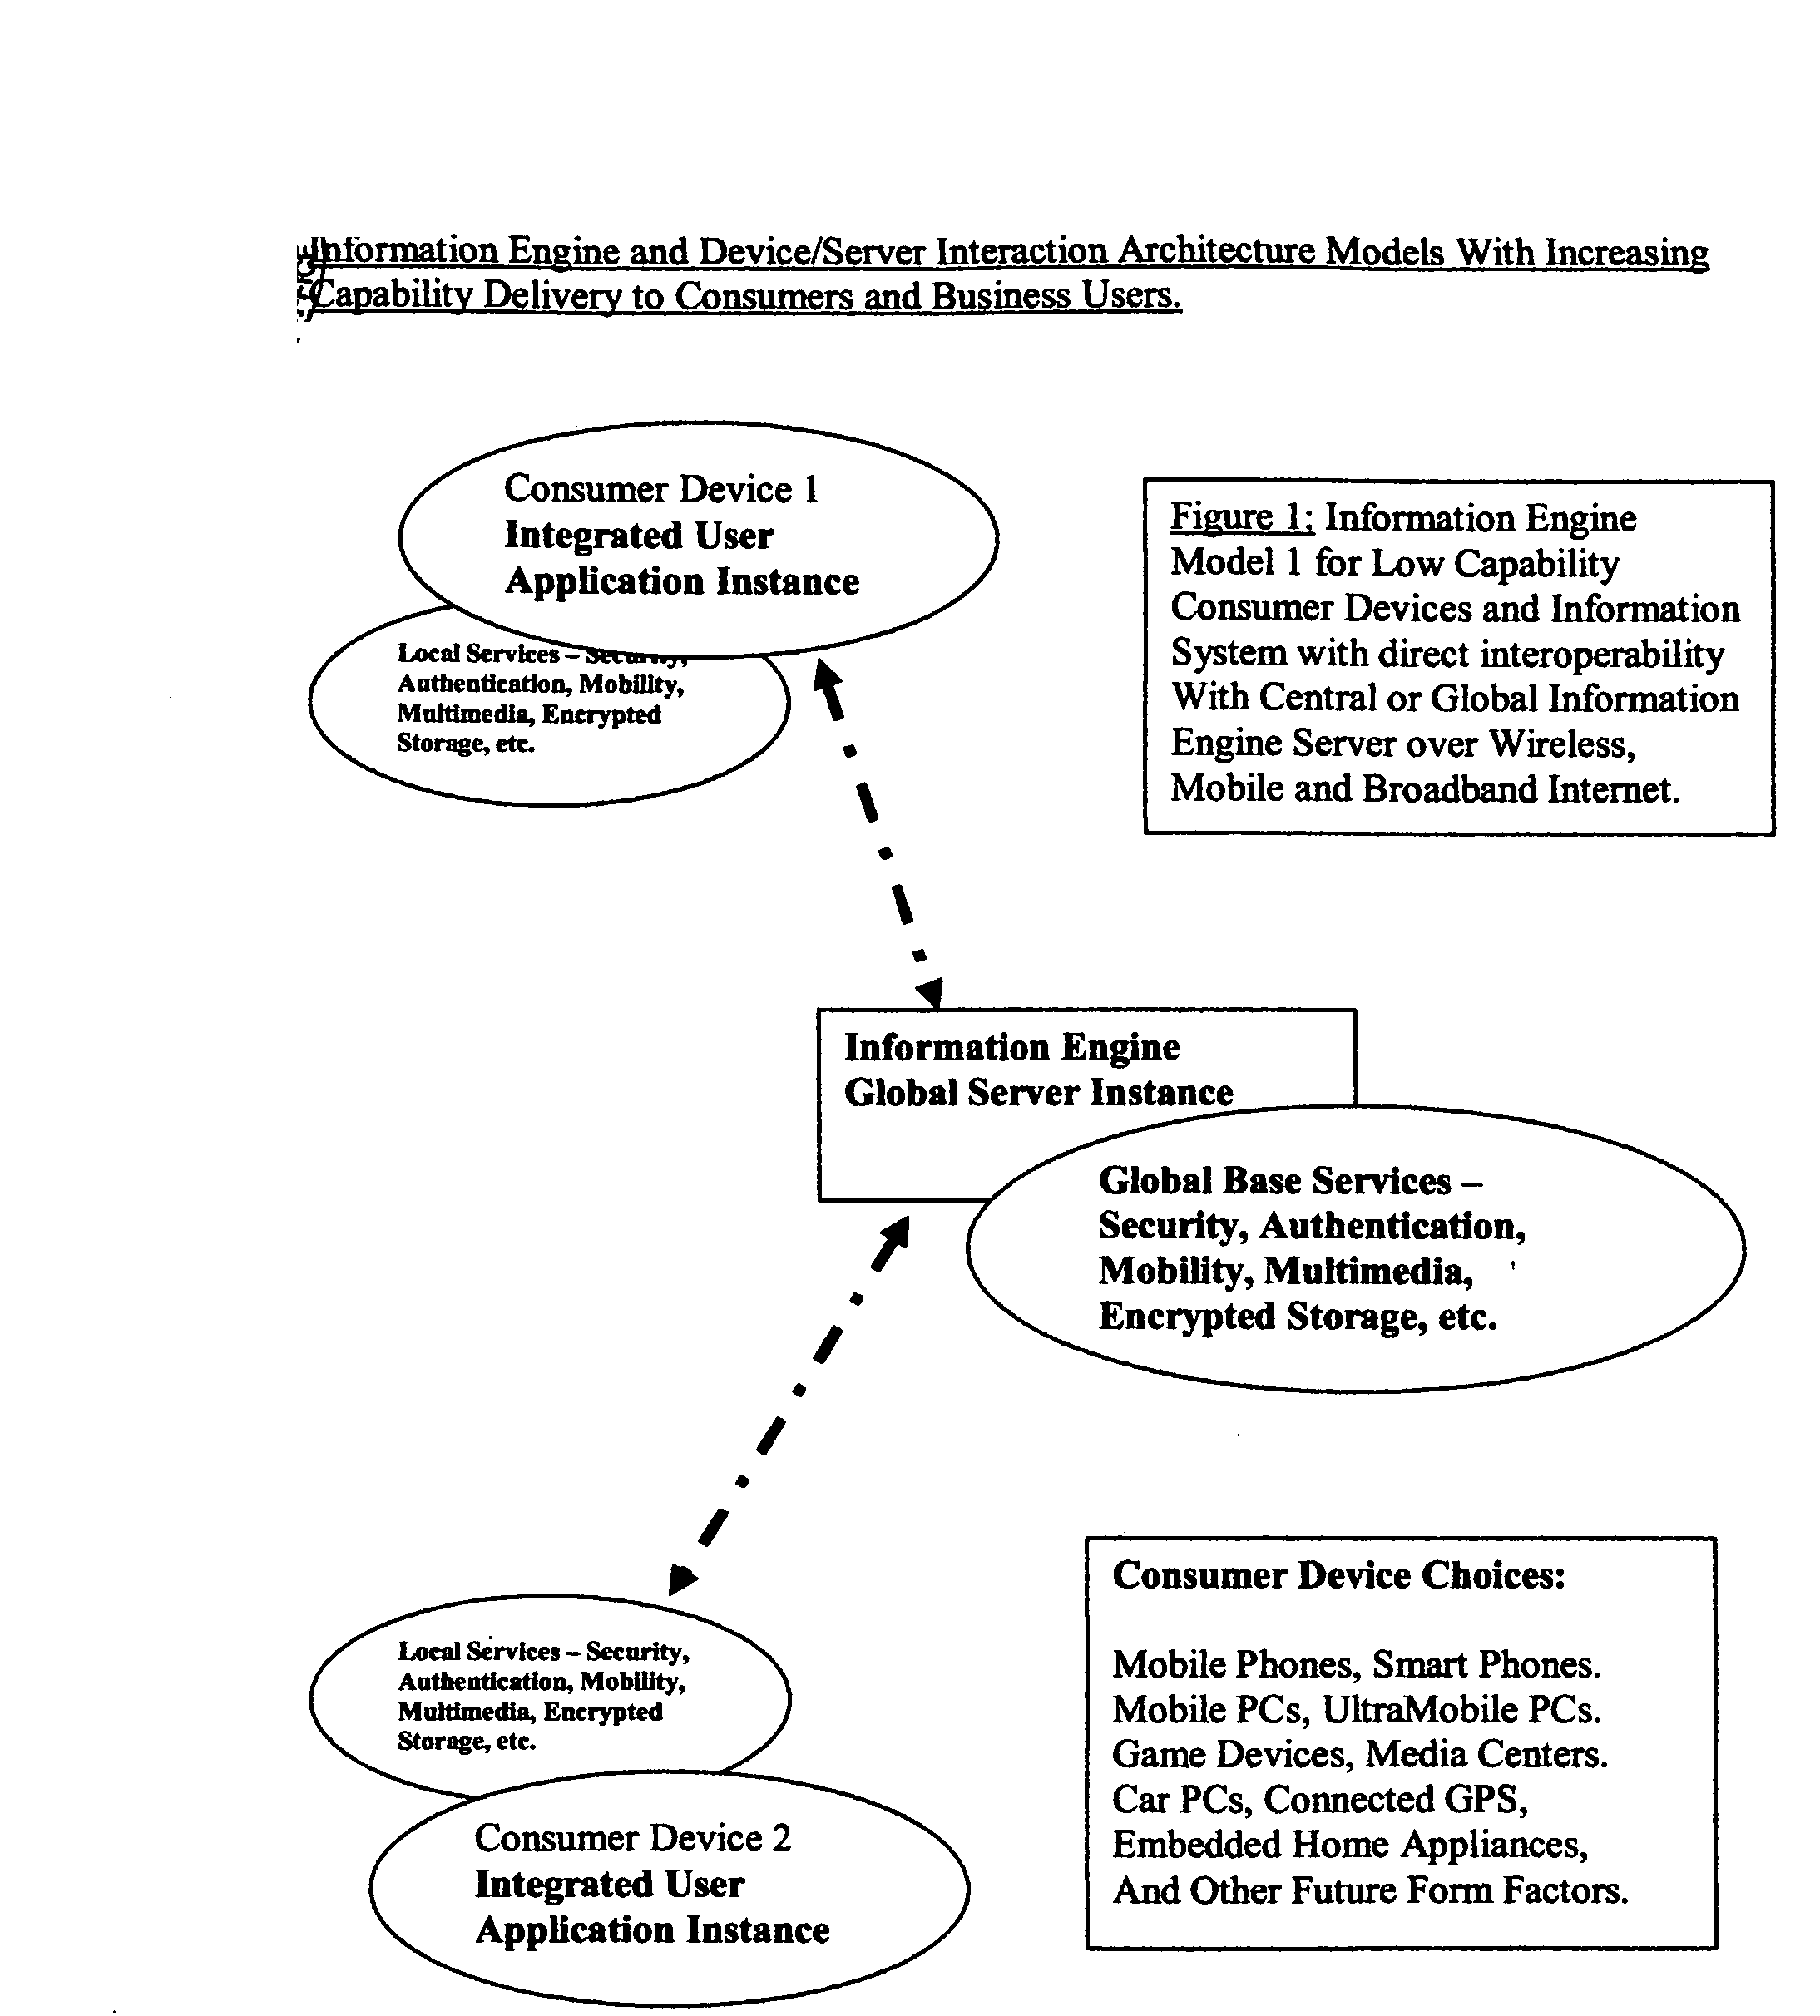 Method and System of Information Engine with Make-Share-Search of consumer and professional Information and Content for Multi-media and Mobile Global Internet